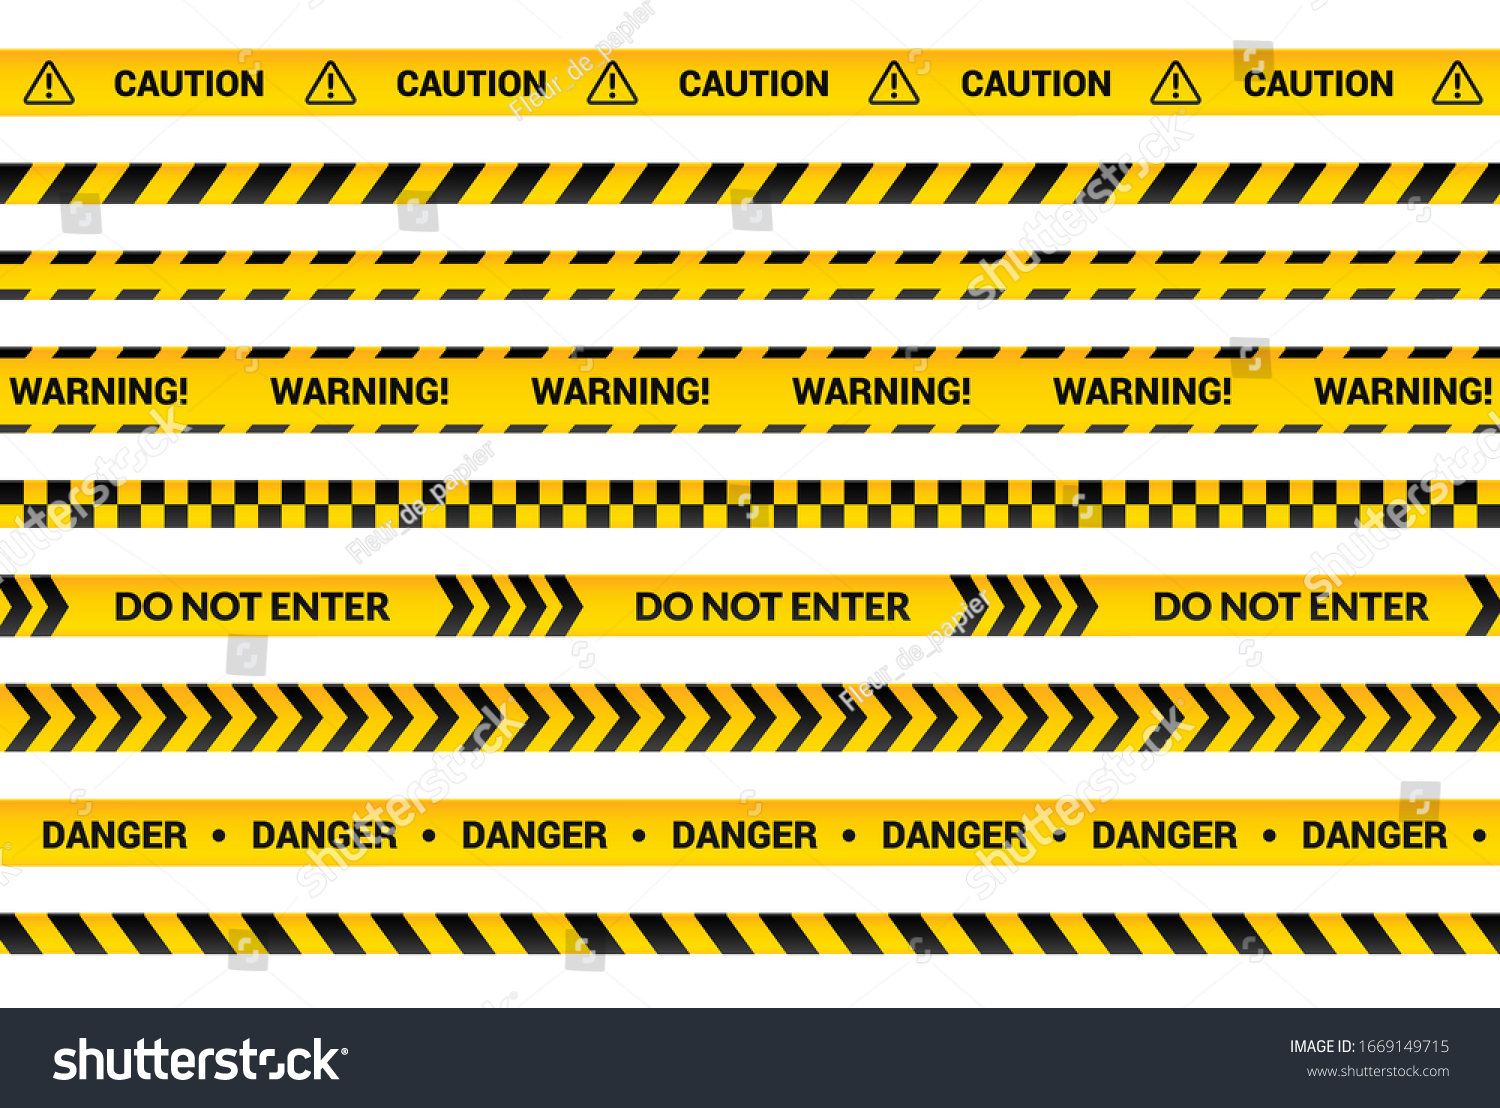 SVG of Caution tape set, yellow warning strips, danger symbol, arrows, yellow lines with black text and triangle sign. Flat banner isolated collection with attention message, cartoon vector illustration. svg